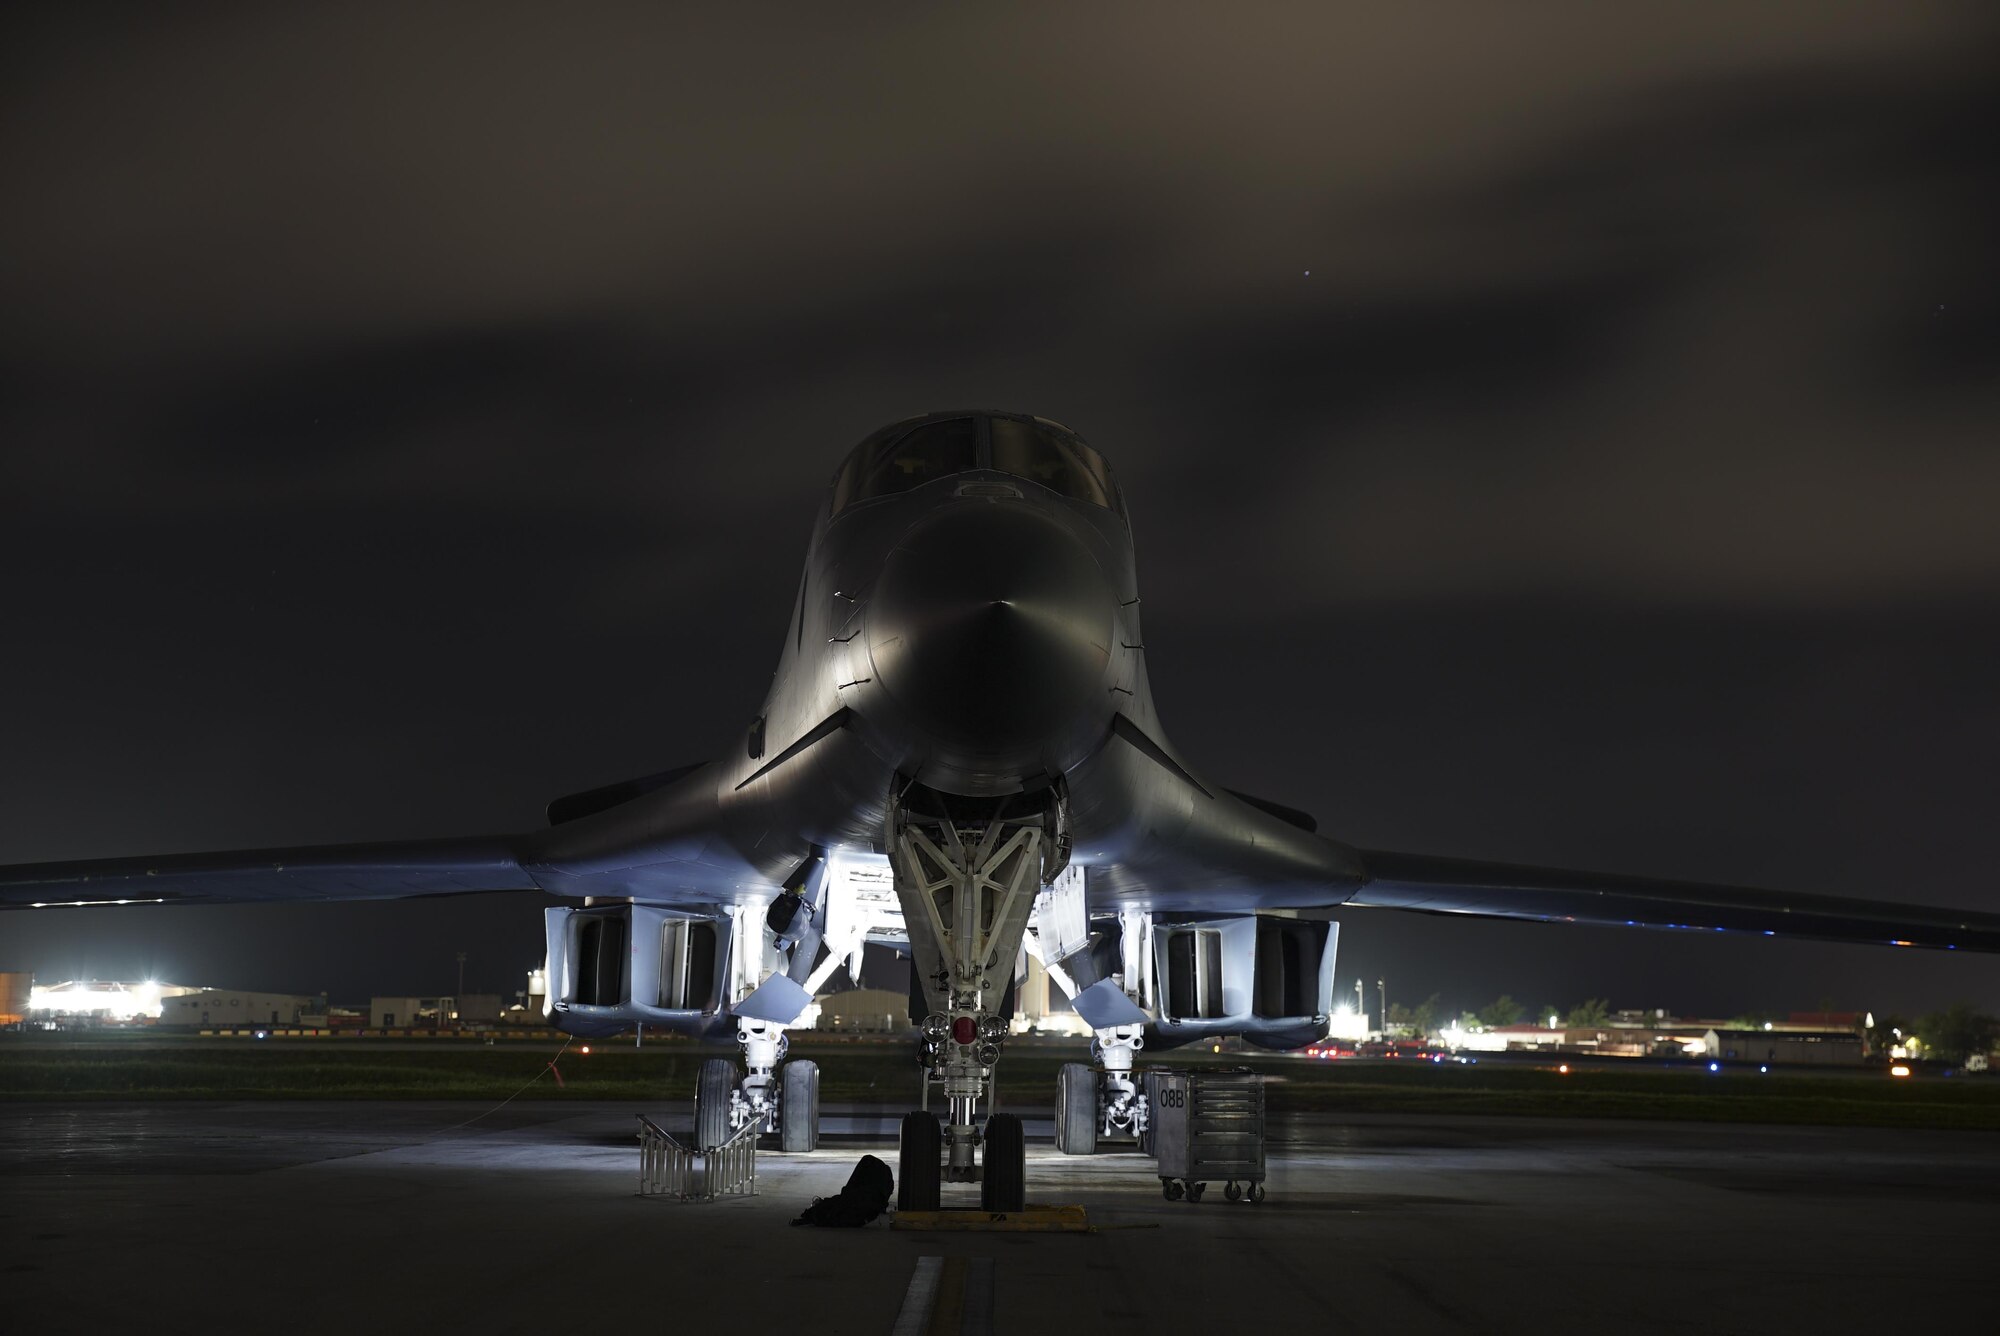 A U.S. Air Force B-1B Lancer aircraft assigned to the 9th Expeditionary Bomb Squadron, deployed from Dyess Air Force Base, Texas, prepares to takeoff from Andersen Air Force Base, Guam, July 20, 2017. The lancers conducted bilateral training mission with Royal Australian Air Force Joint Terminal Attack Controllers (JTACs), July 20 as part of Talisman Saber 17 a training exercise designed to maximize combined training opportunities and conduct maritime preposition and logistics operations in the Pacific. (U.S. Air Force photo/Tech. Sgt. Richard P. Ebensberger)